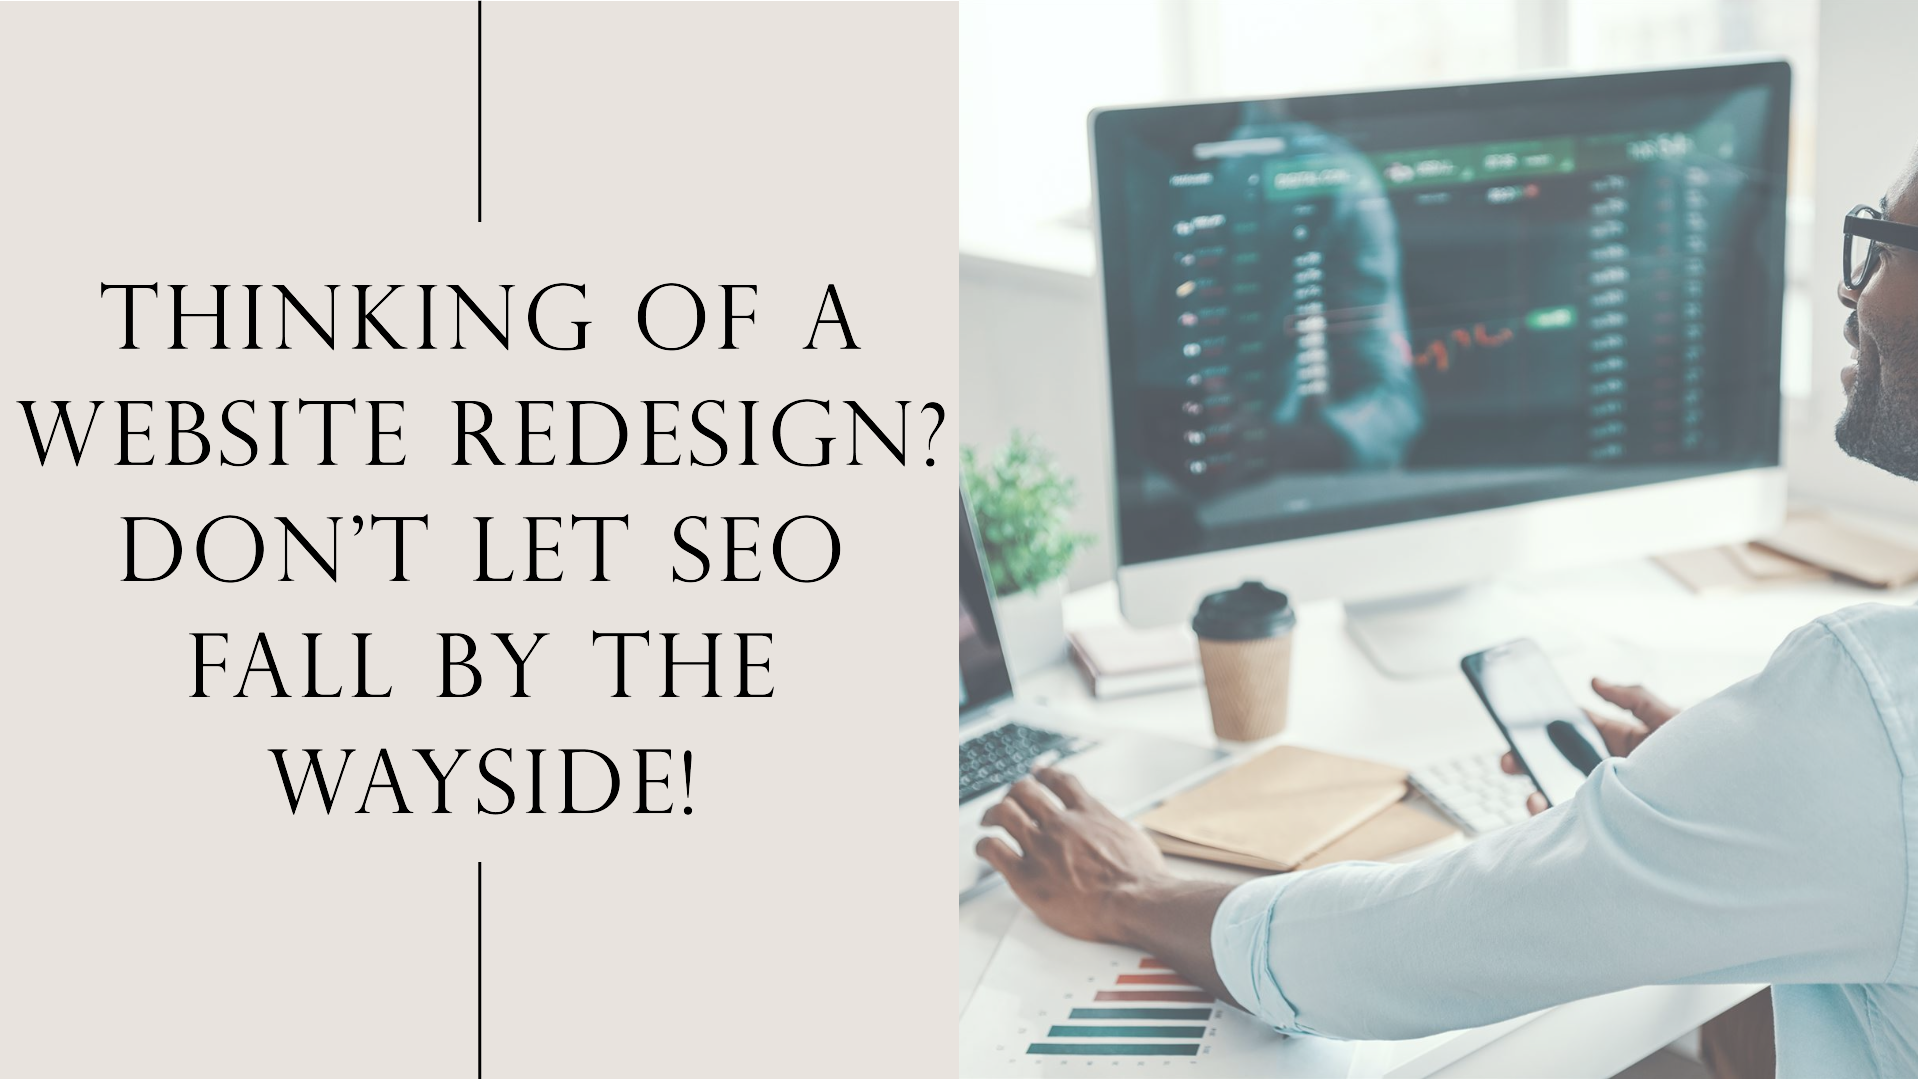 Thinking of a Website Redesign? Don't Let SEO Fall By the Wayside!